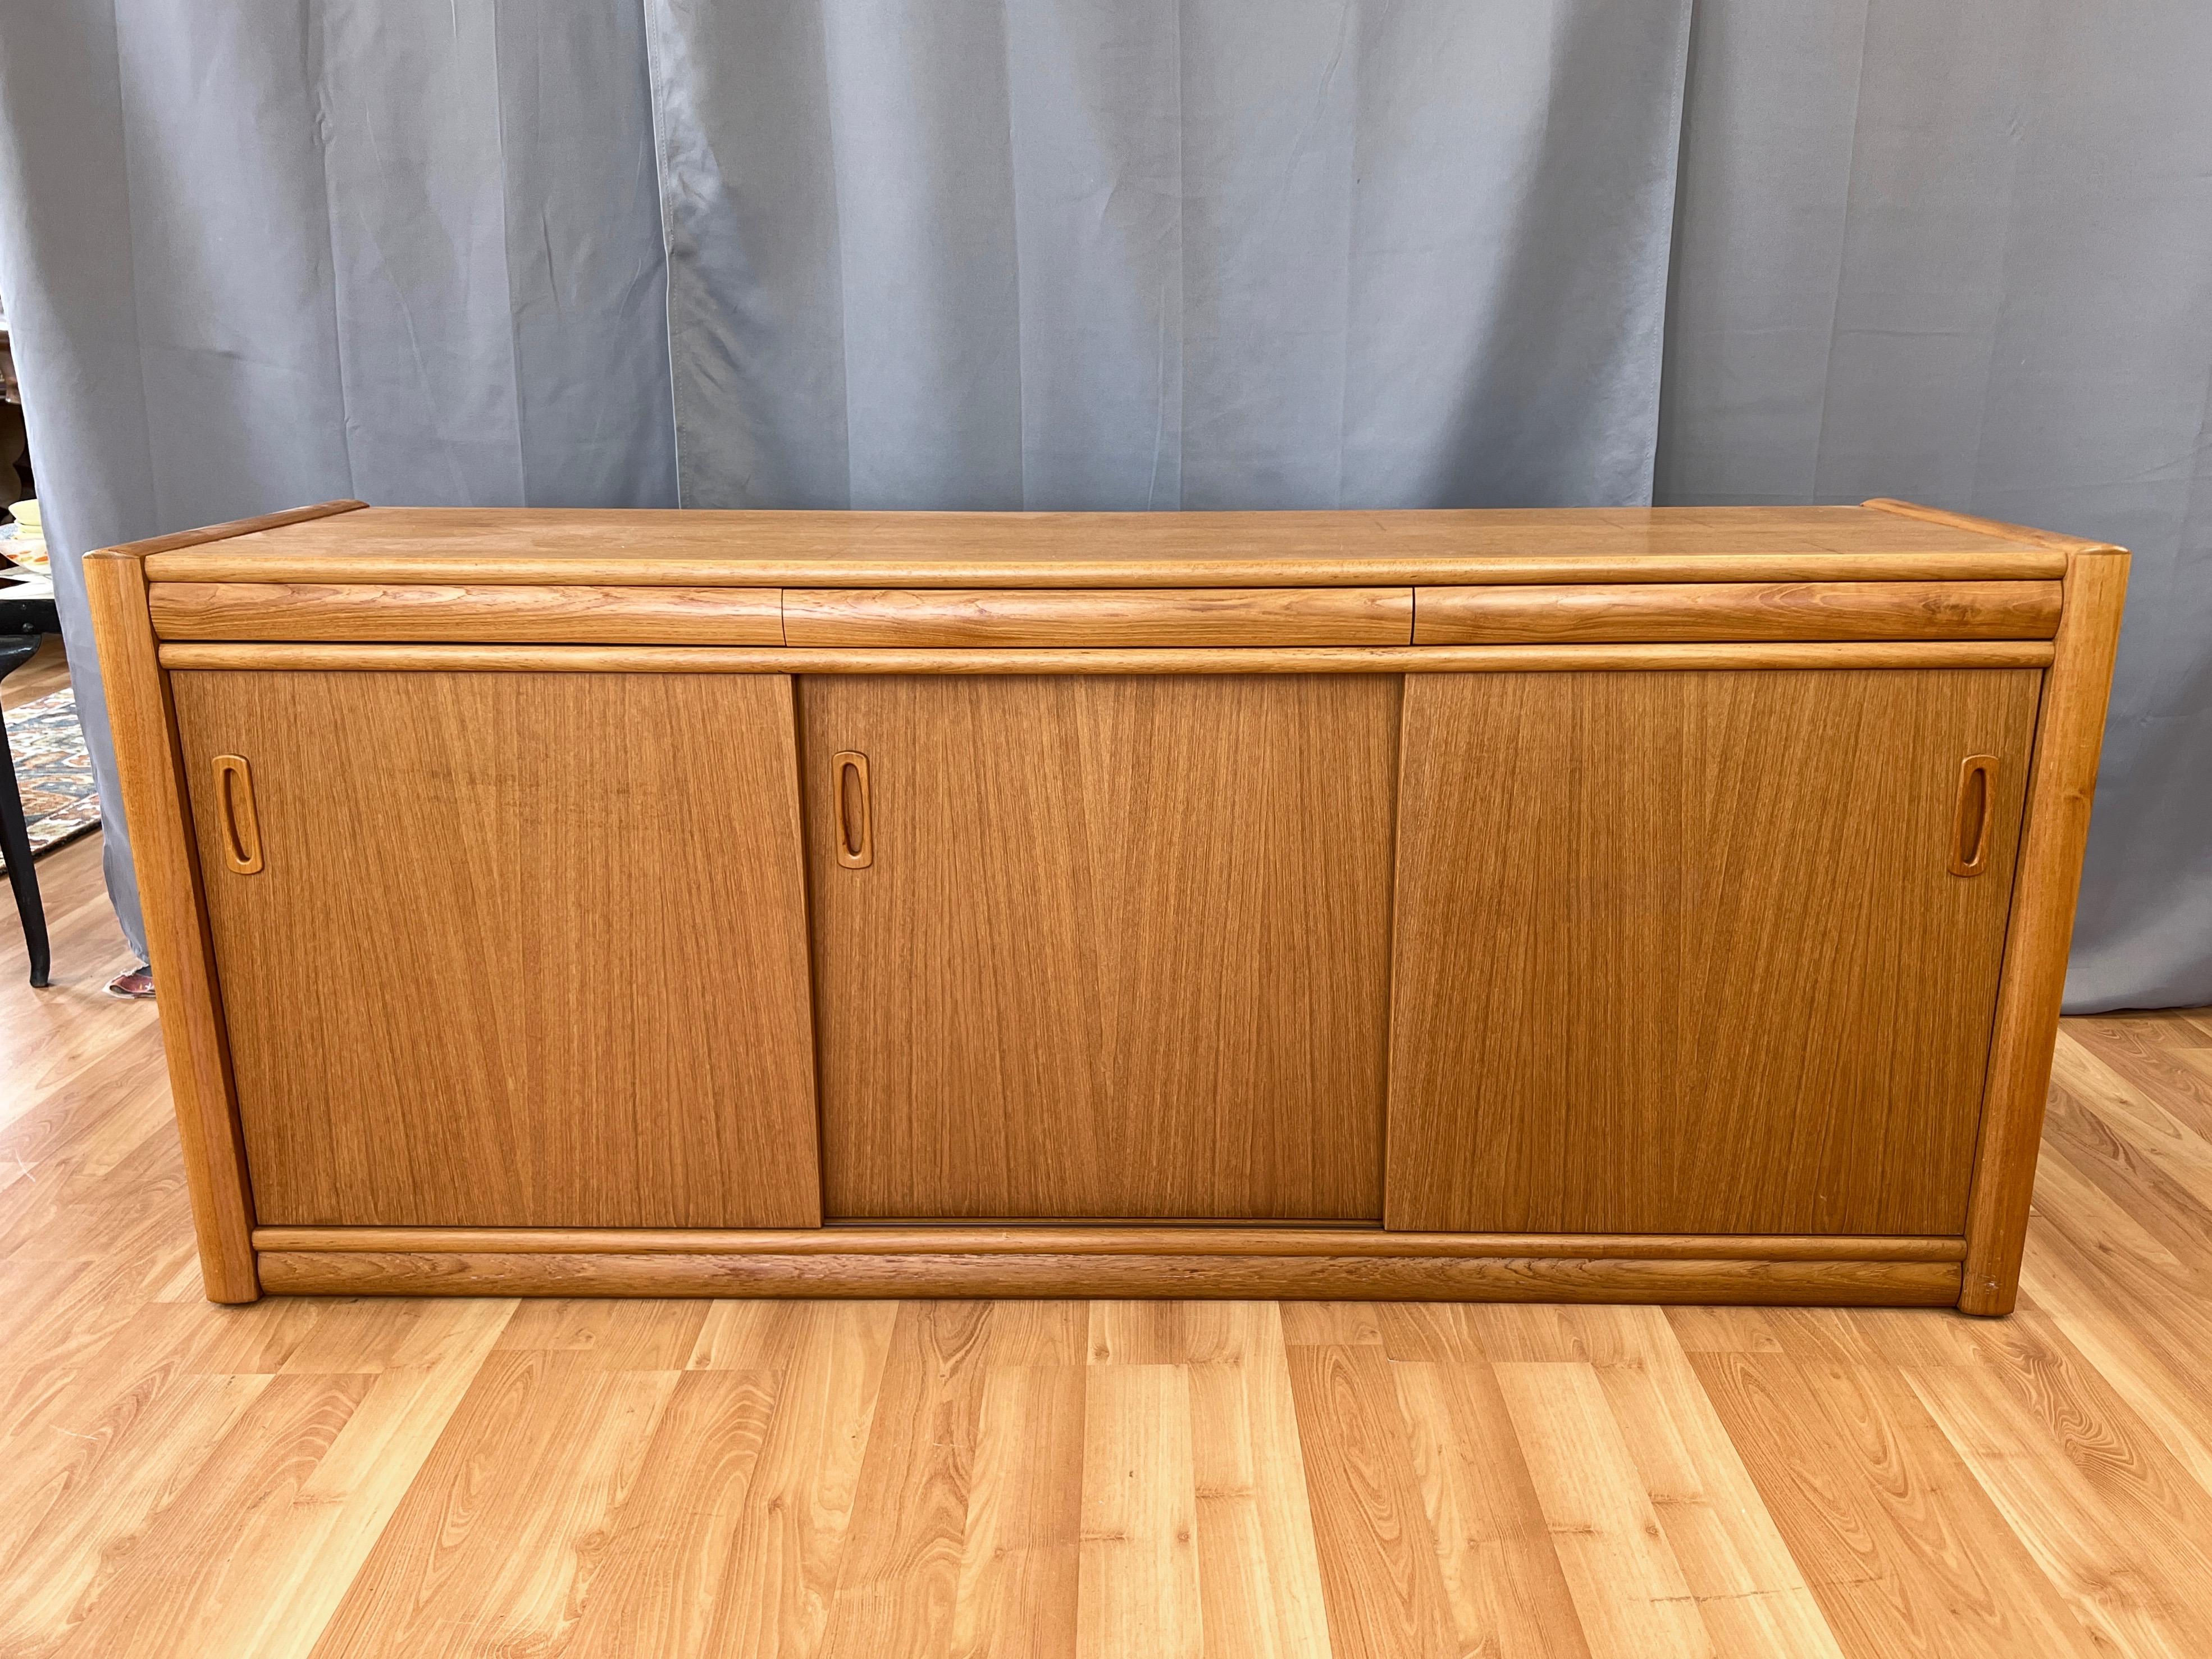 A very handsome 1970s six-foot-wide Danish teak sideboard with three sliding doors and three push-to-open drawers.

Clean Scandinavian modern design in bookmatched teak with nicely rounded edges and abundant storage space within. Features a trio of